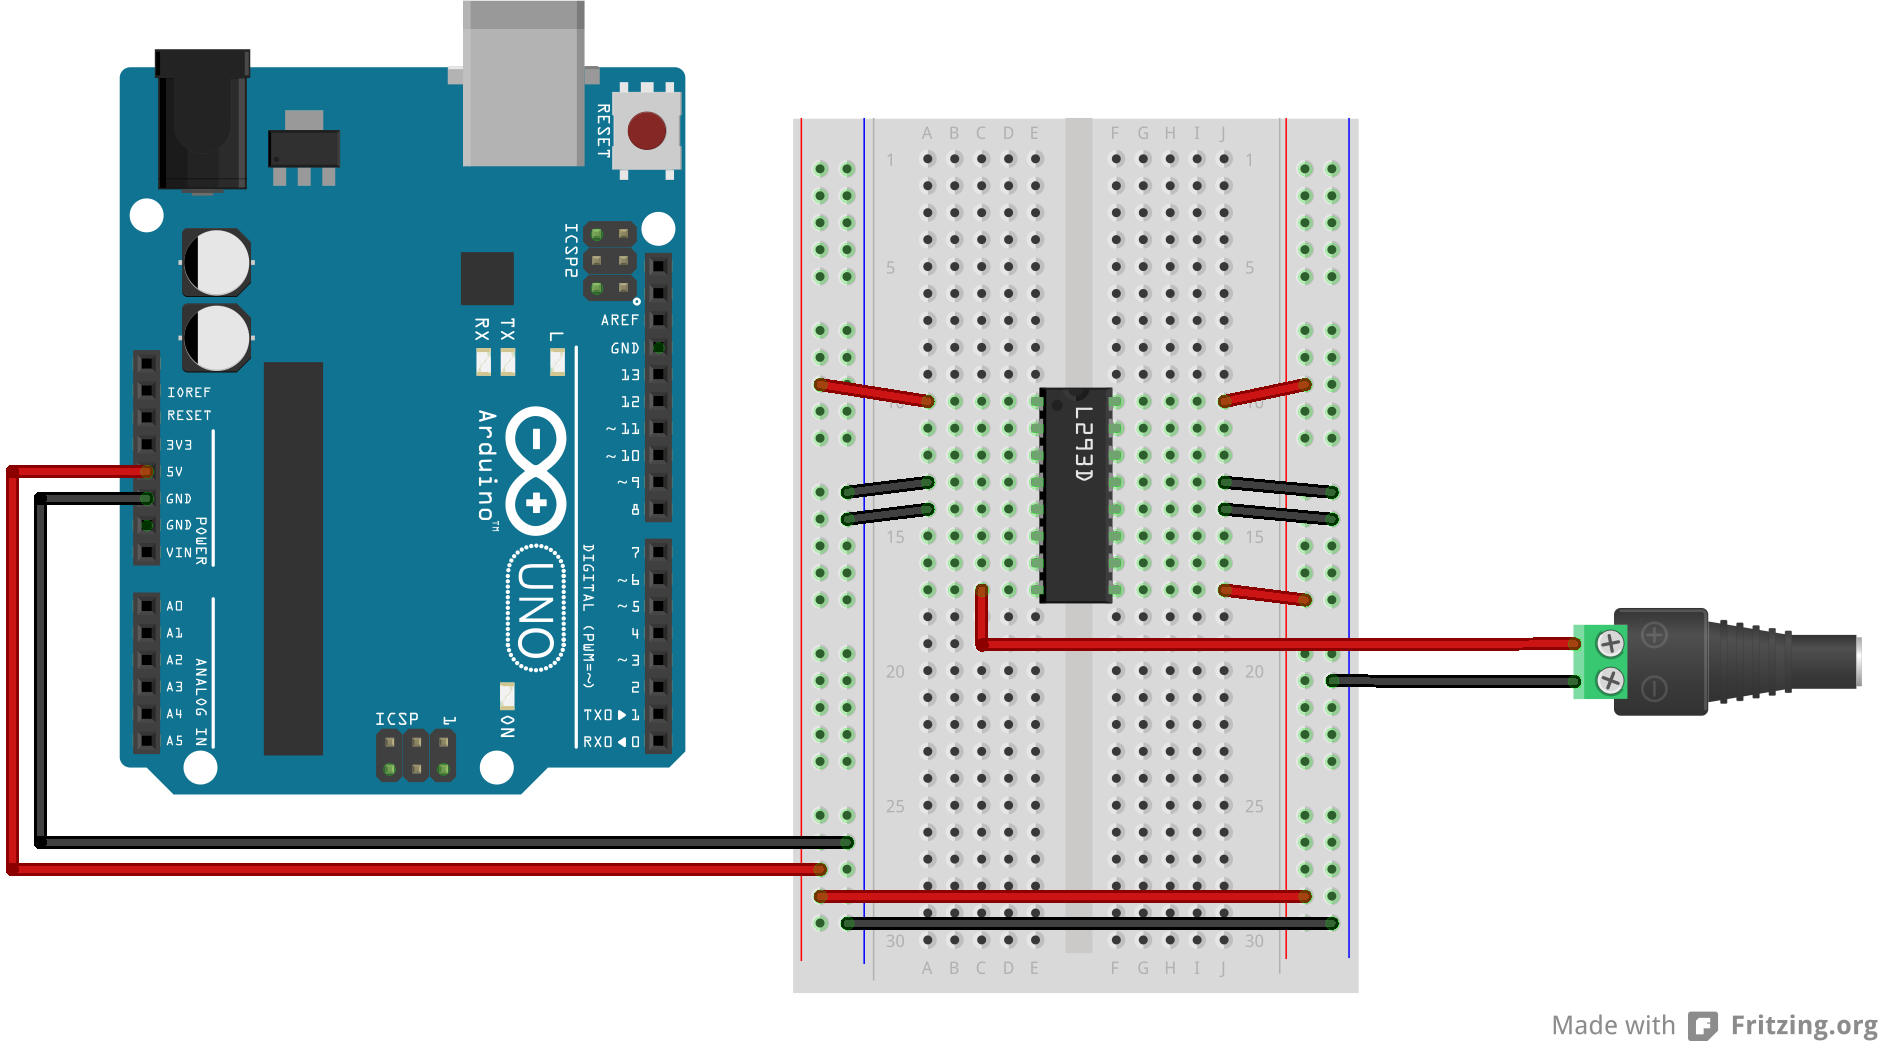 Breadboard view of an h-bridge connected to an Arduino for driving a stepper motor. The Arduino and breadboard are connected as described in the previous breadboard view. The H-bridge straddles the middle of the breadboard in rows 10 through 16. The H-bridge's pins 1, 9, and 16 are connected to the left or right voltage buses of the breadboard, whichever is closest to their side. An external DC power jack connects to the right side ground bus of the breadboard from its negative terminal, and its positive terminal connects to pin 8 of the H-bridge.